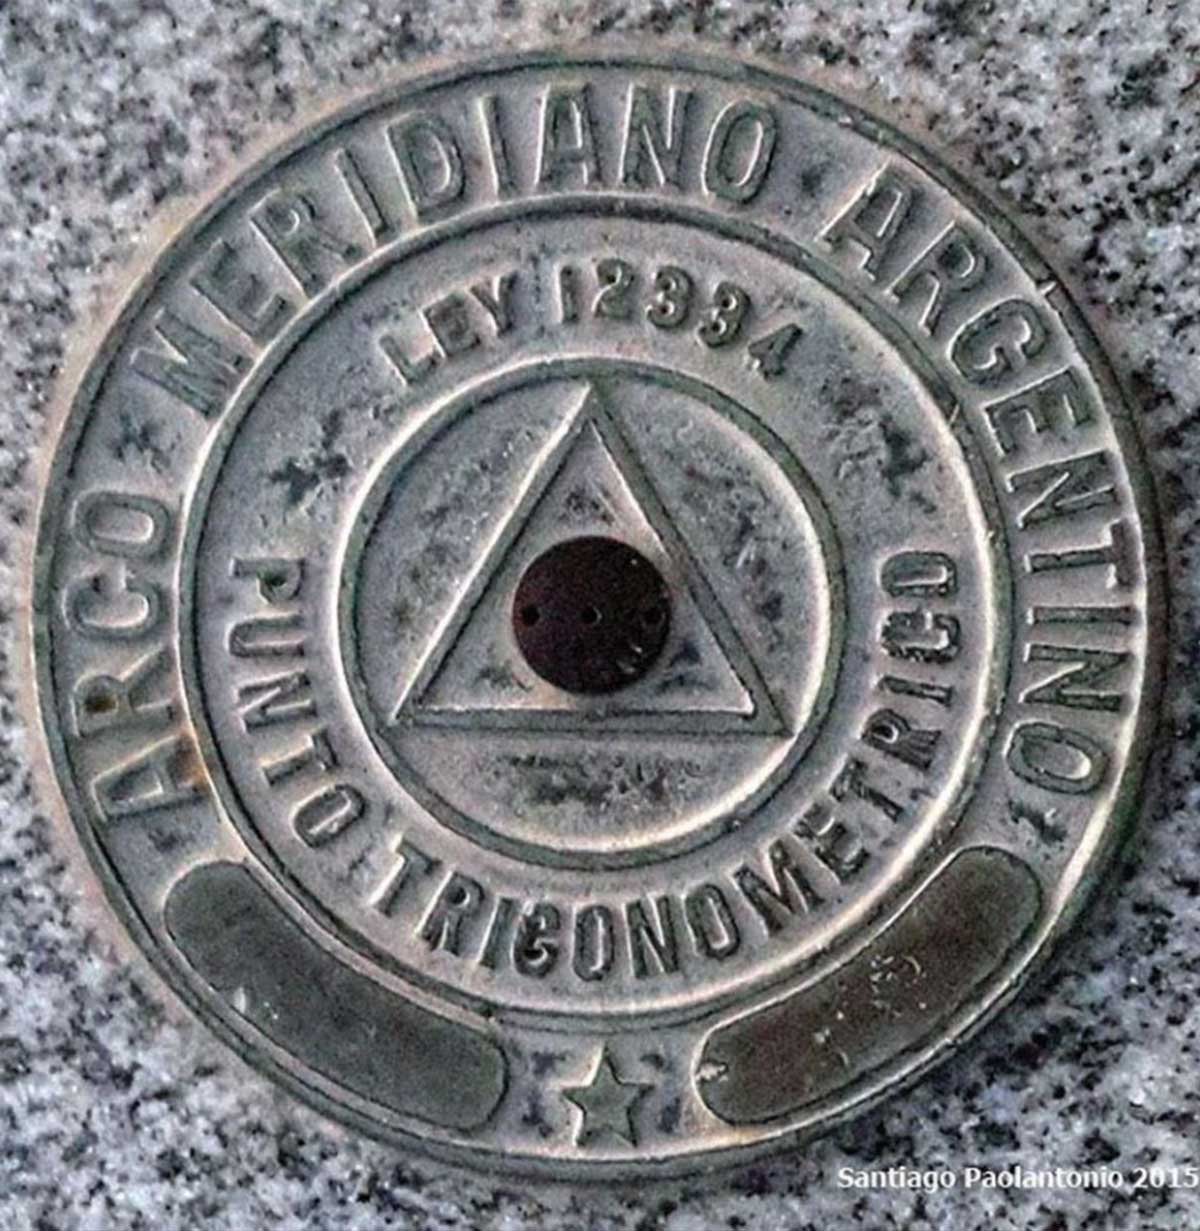 A bronze medallion of the Astronomical Observatory of the National University of Cordoba